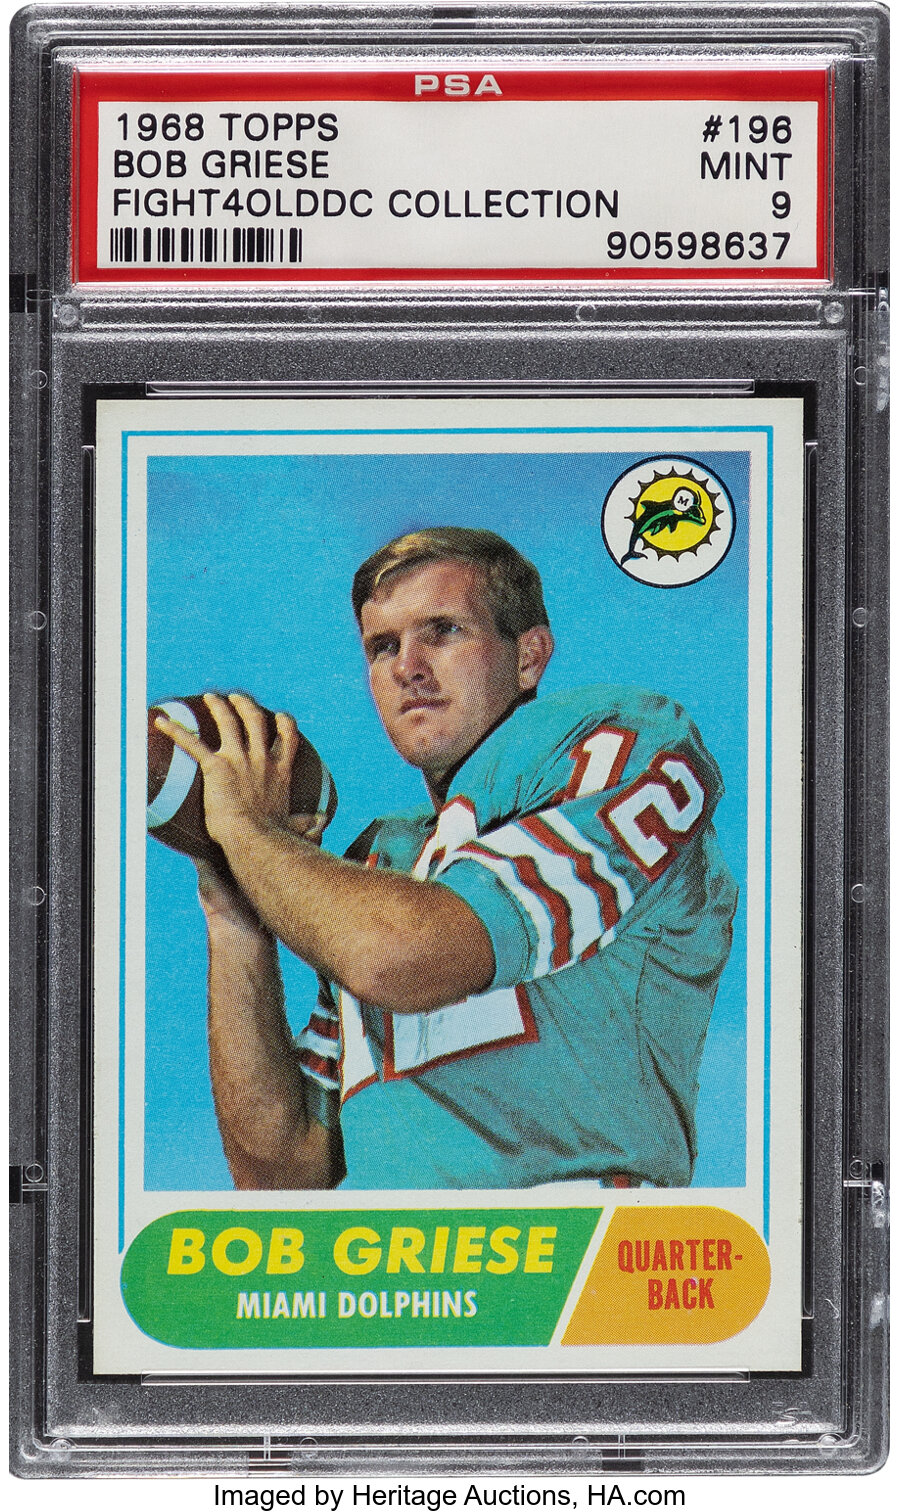 1968 Topps Bob Griese Rookie #196 PSA Mint 9 - Only Two Higher